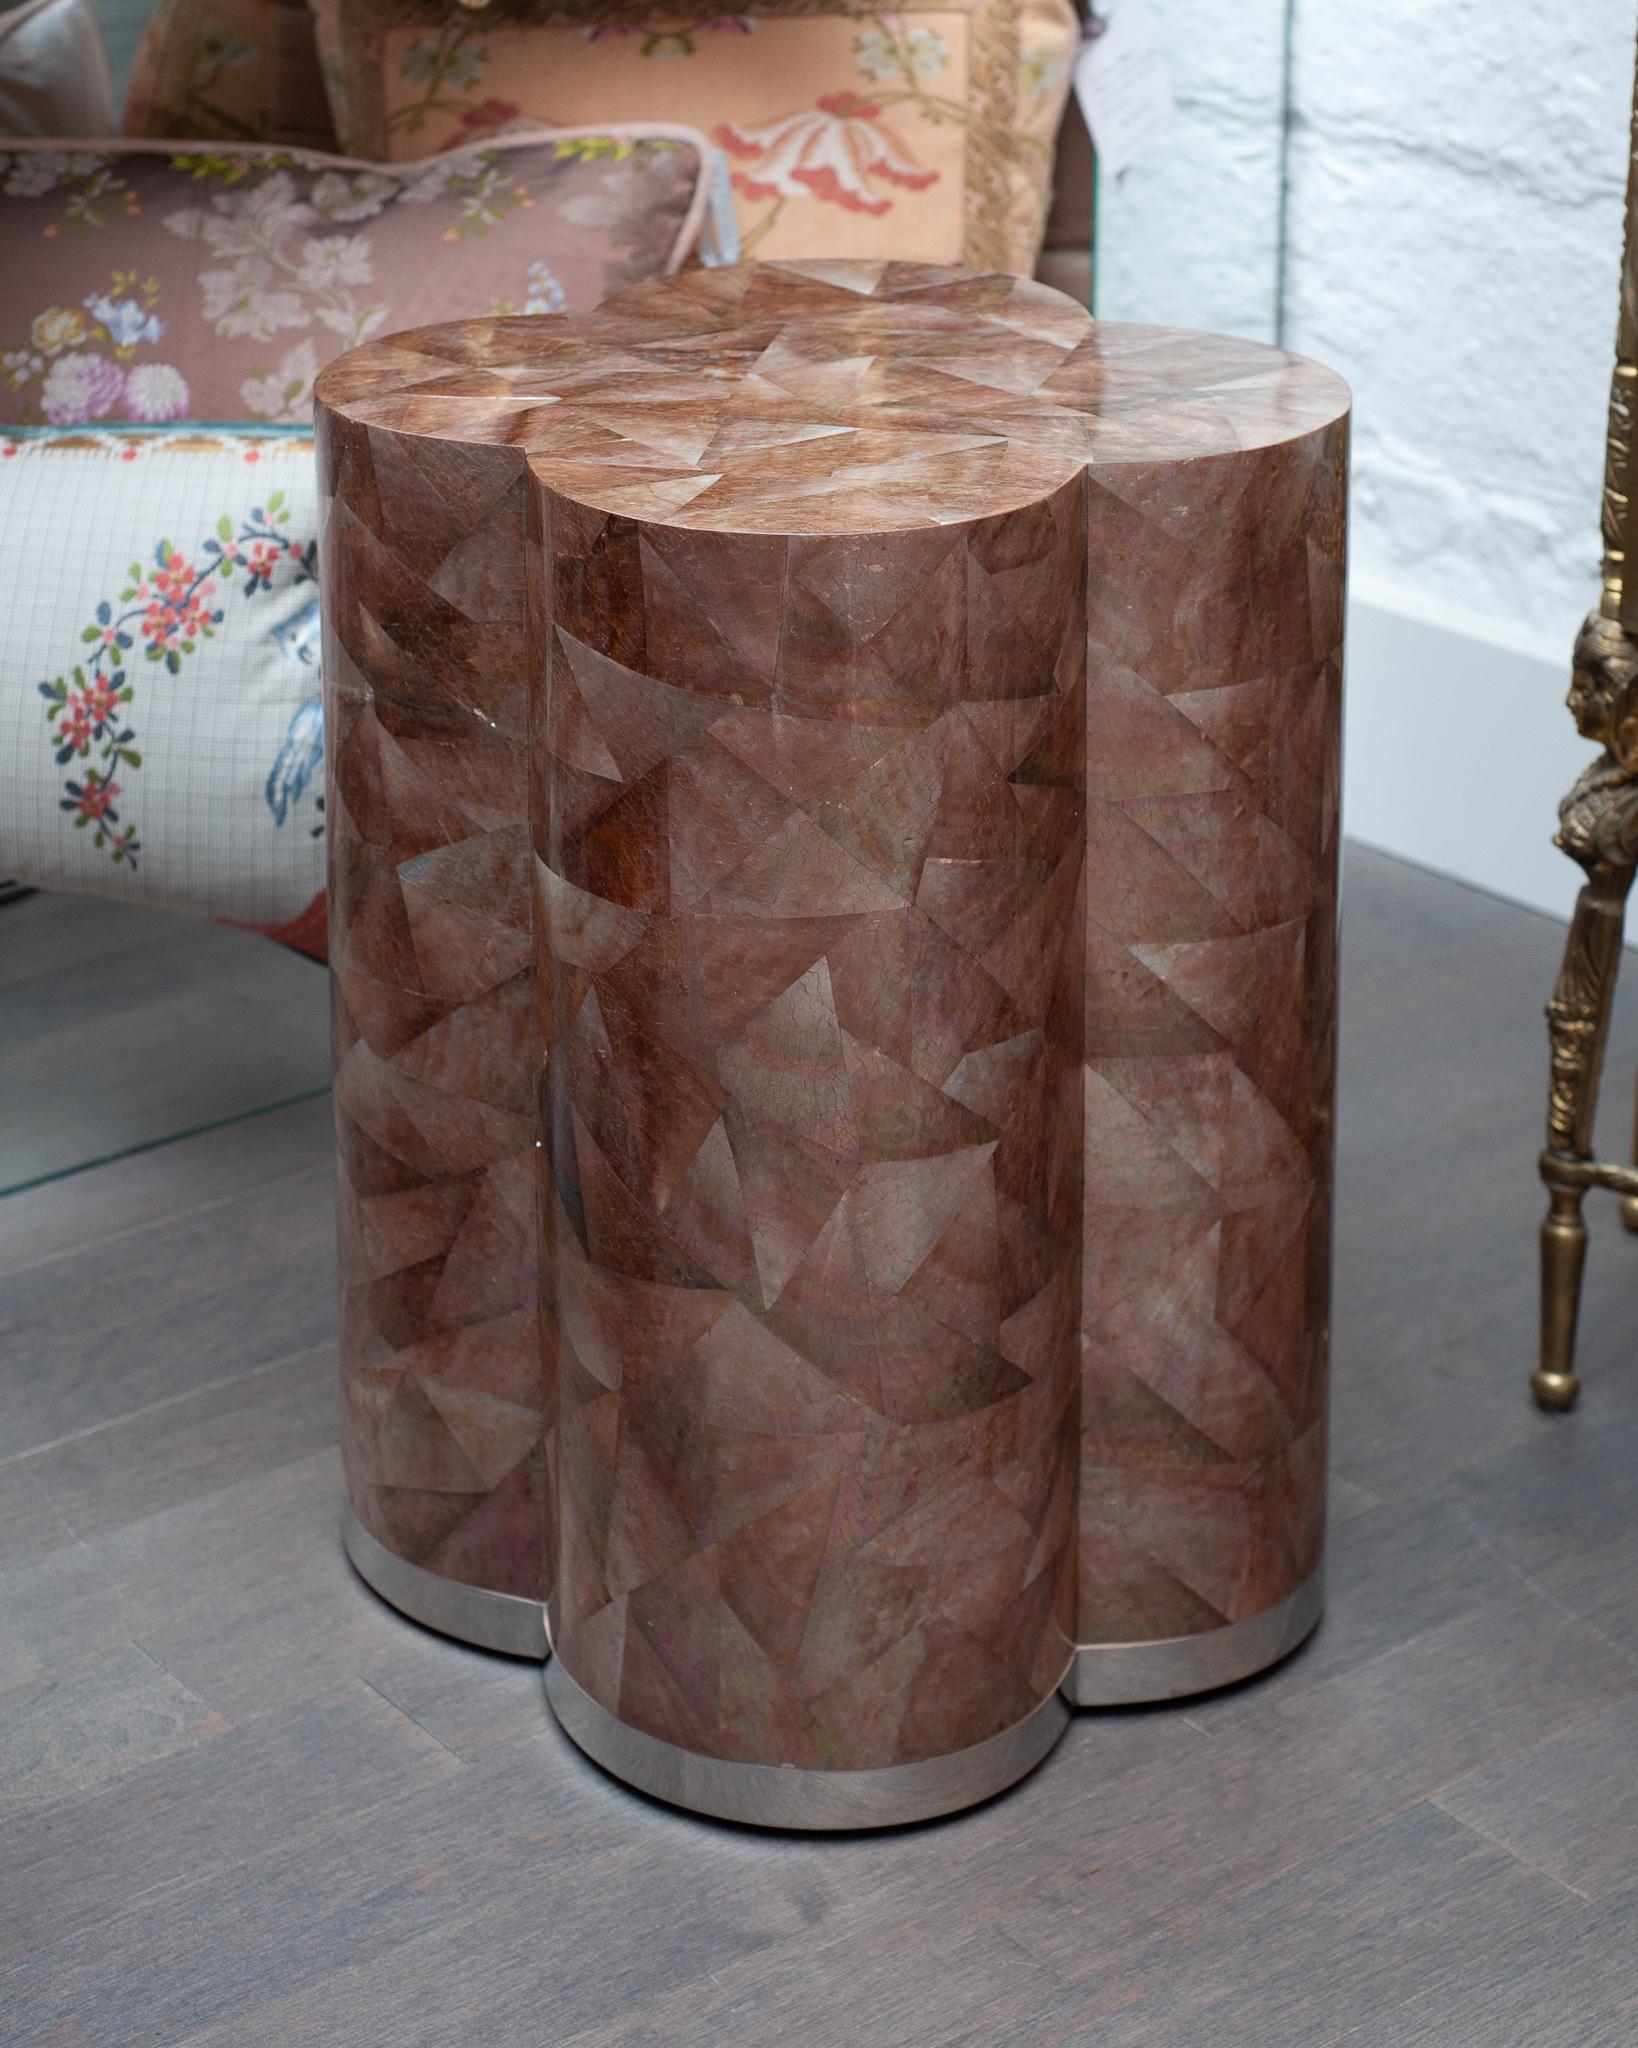 A stunning contemporary clover drum table finished in golden brown pen shell with polished stainless steel trim at the base. Masterfully created and flawlessly executed, this shell drum table boasts a rainbow of tones dispersed amongst the brown pen